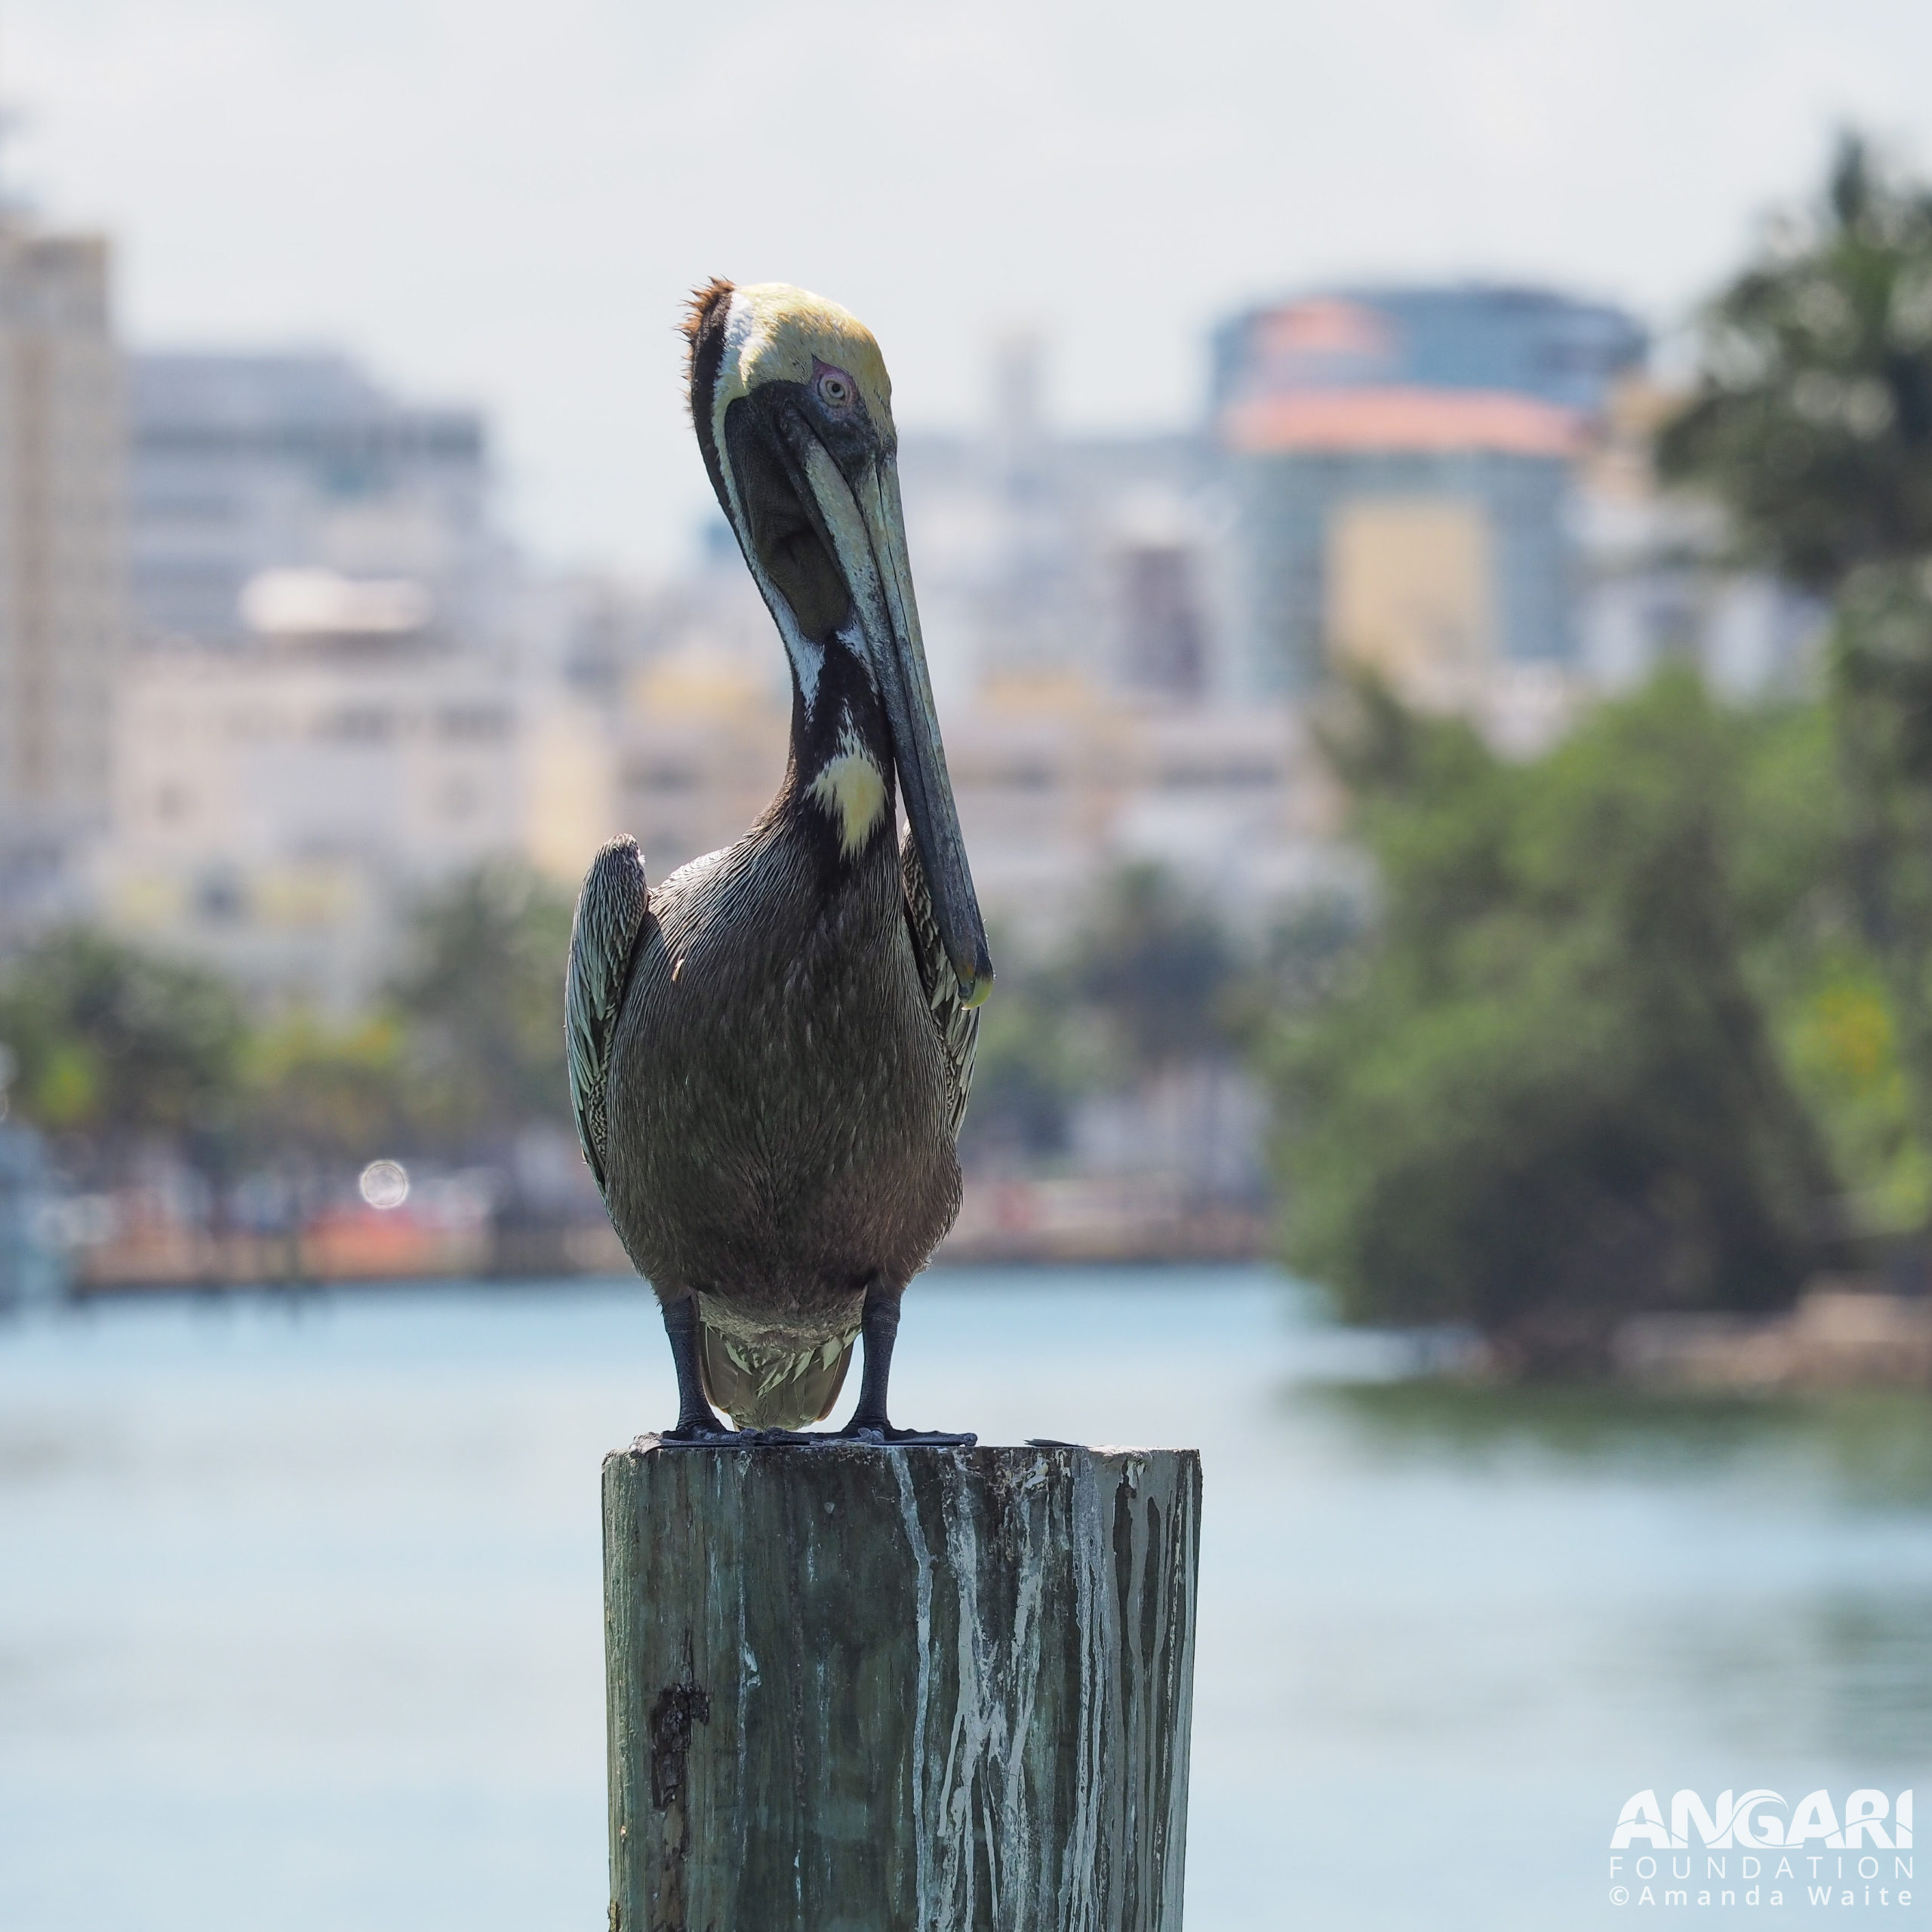 Brown pelican perching on wooden post.